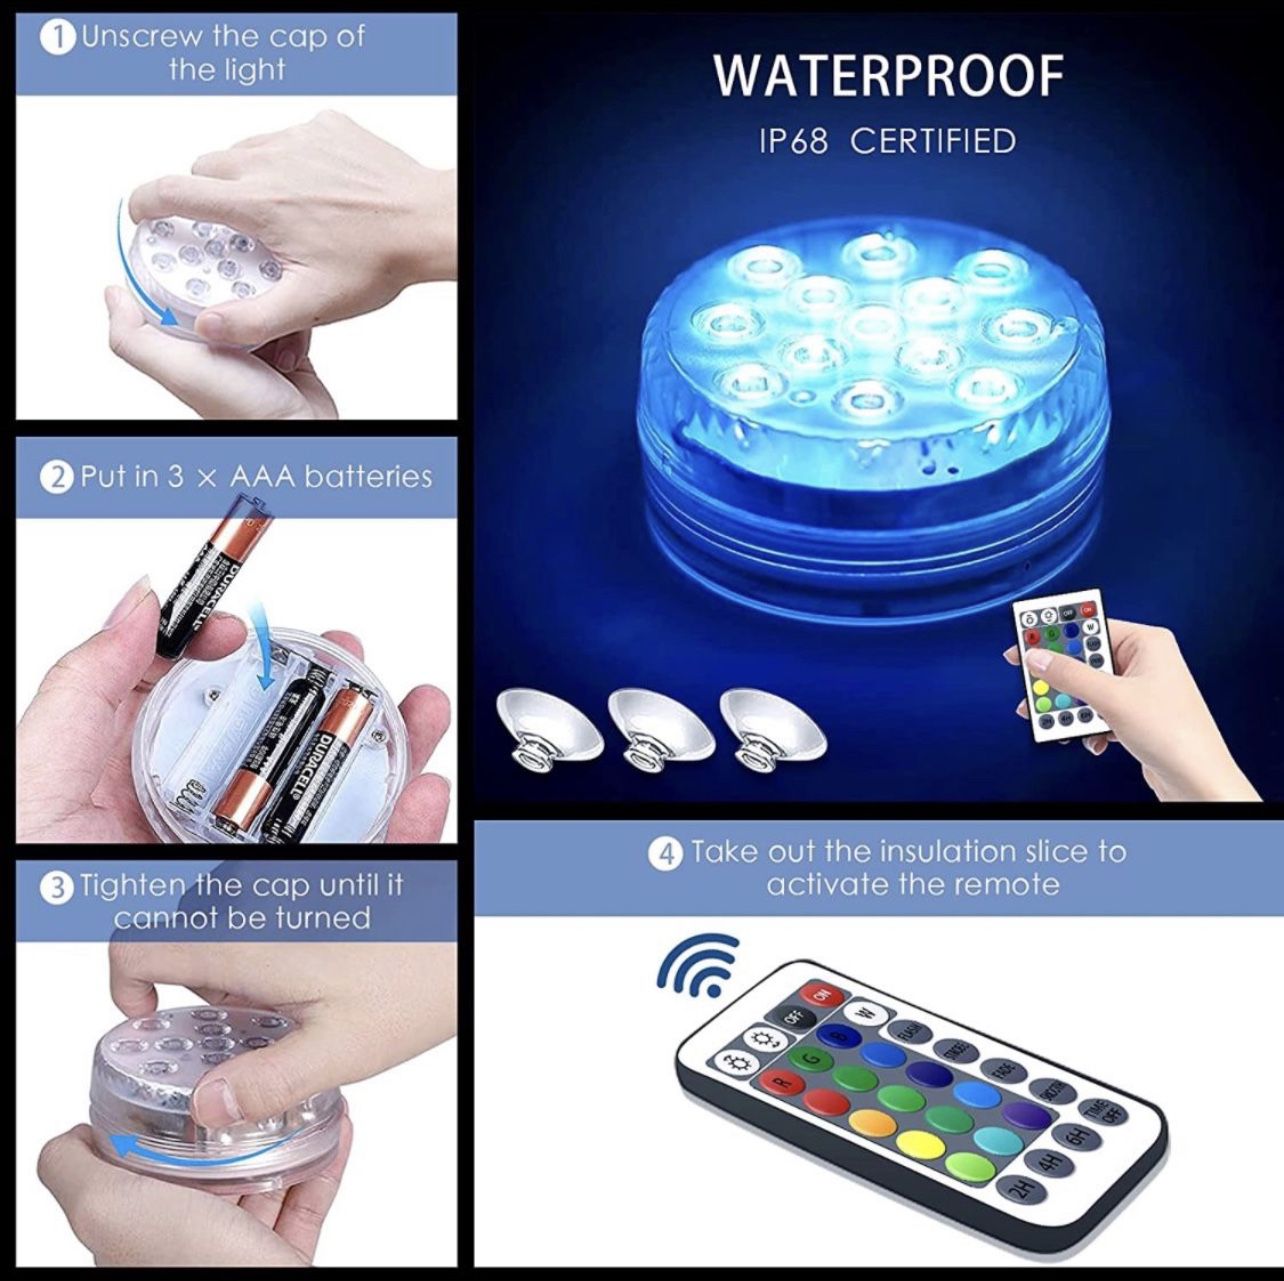 Submersible LED Lights & Pool Lights with RF Remote, Bathtub Light,Waterproof 16 Colors Changing  Underwater with Magnets, Shower Lights for Hot Tub, 